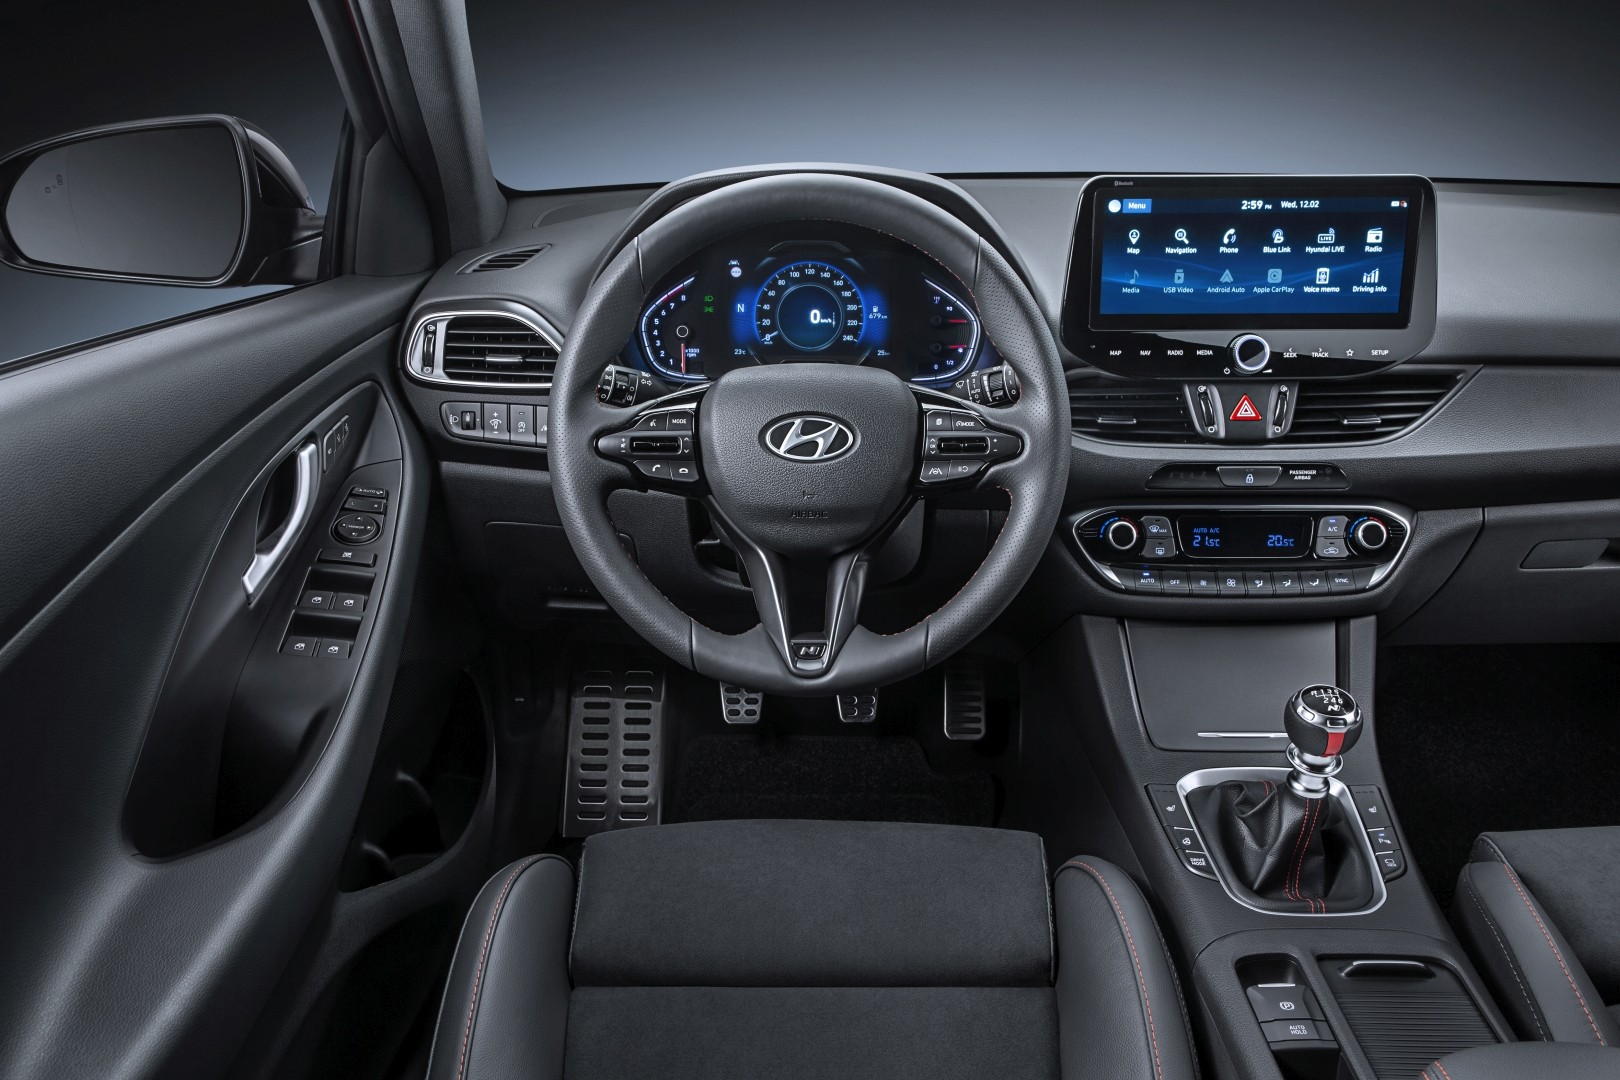 Hyundai i30 Fastback (2020) - pictures, information & specs